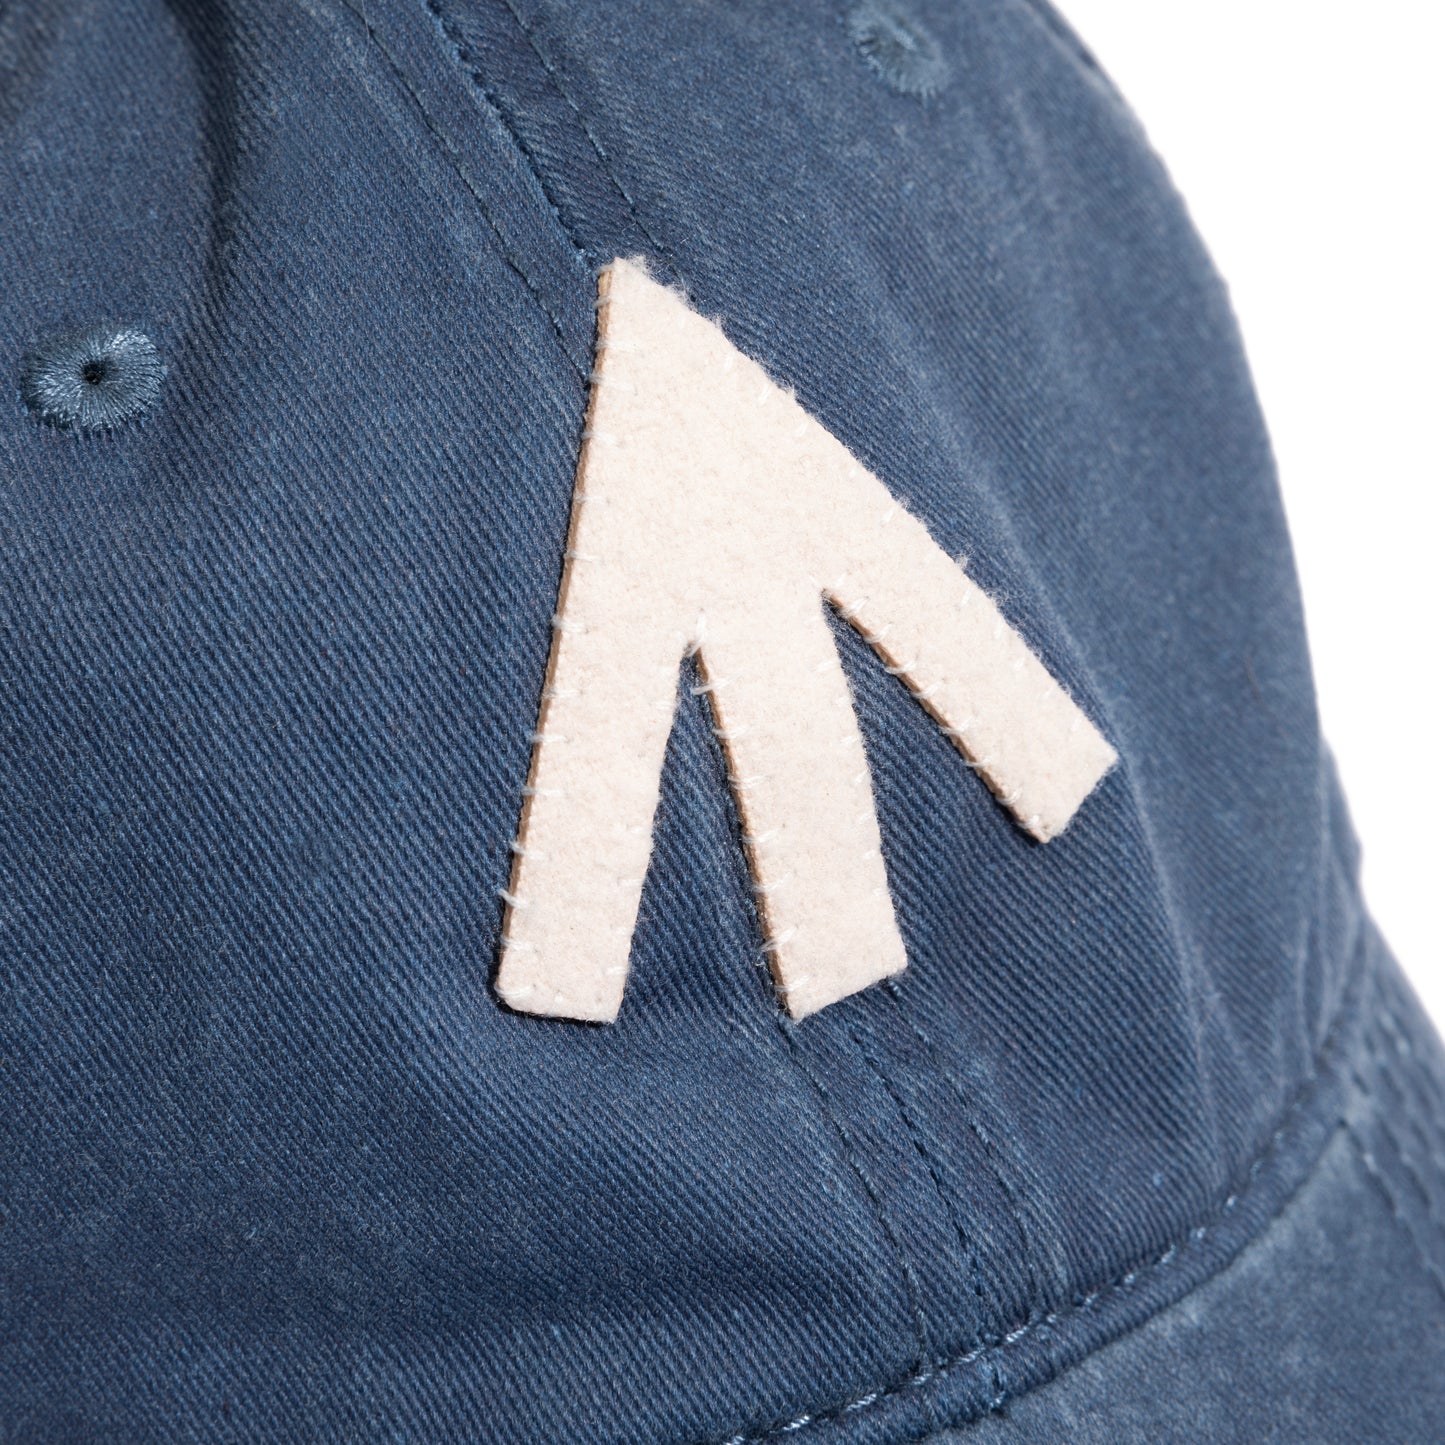 [PREORDER] FADED WASHED HAND QUILTED “BROAD ARROW” CAP